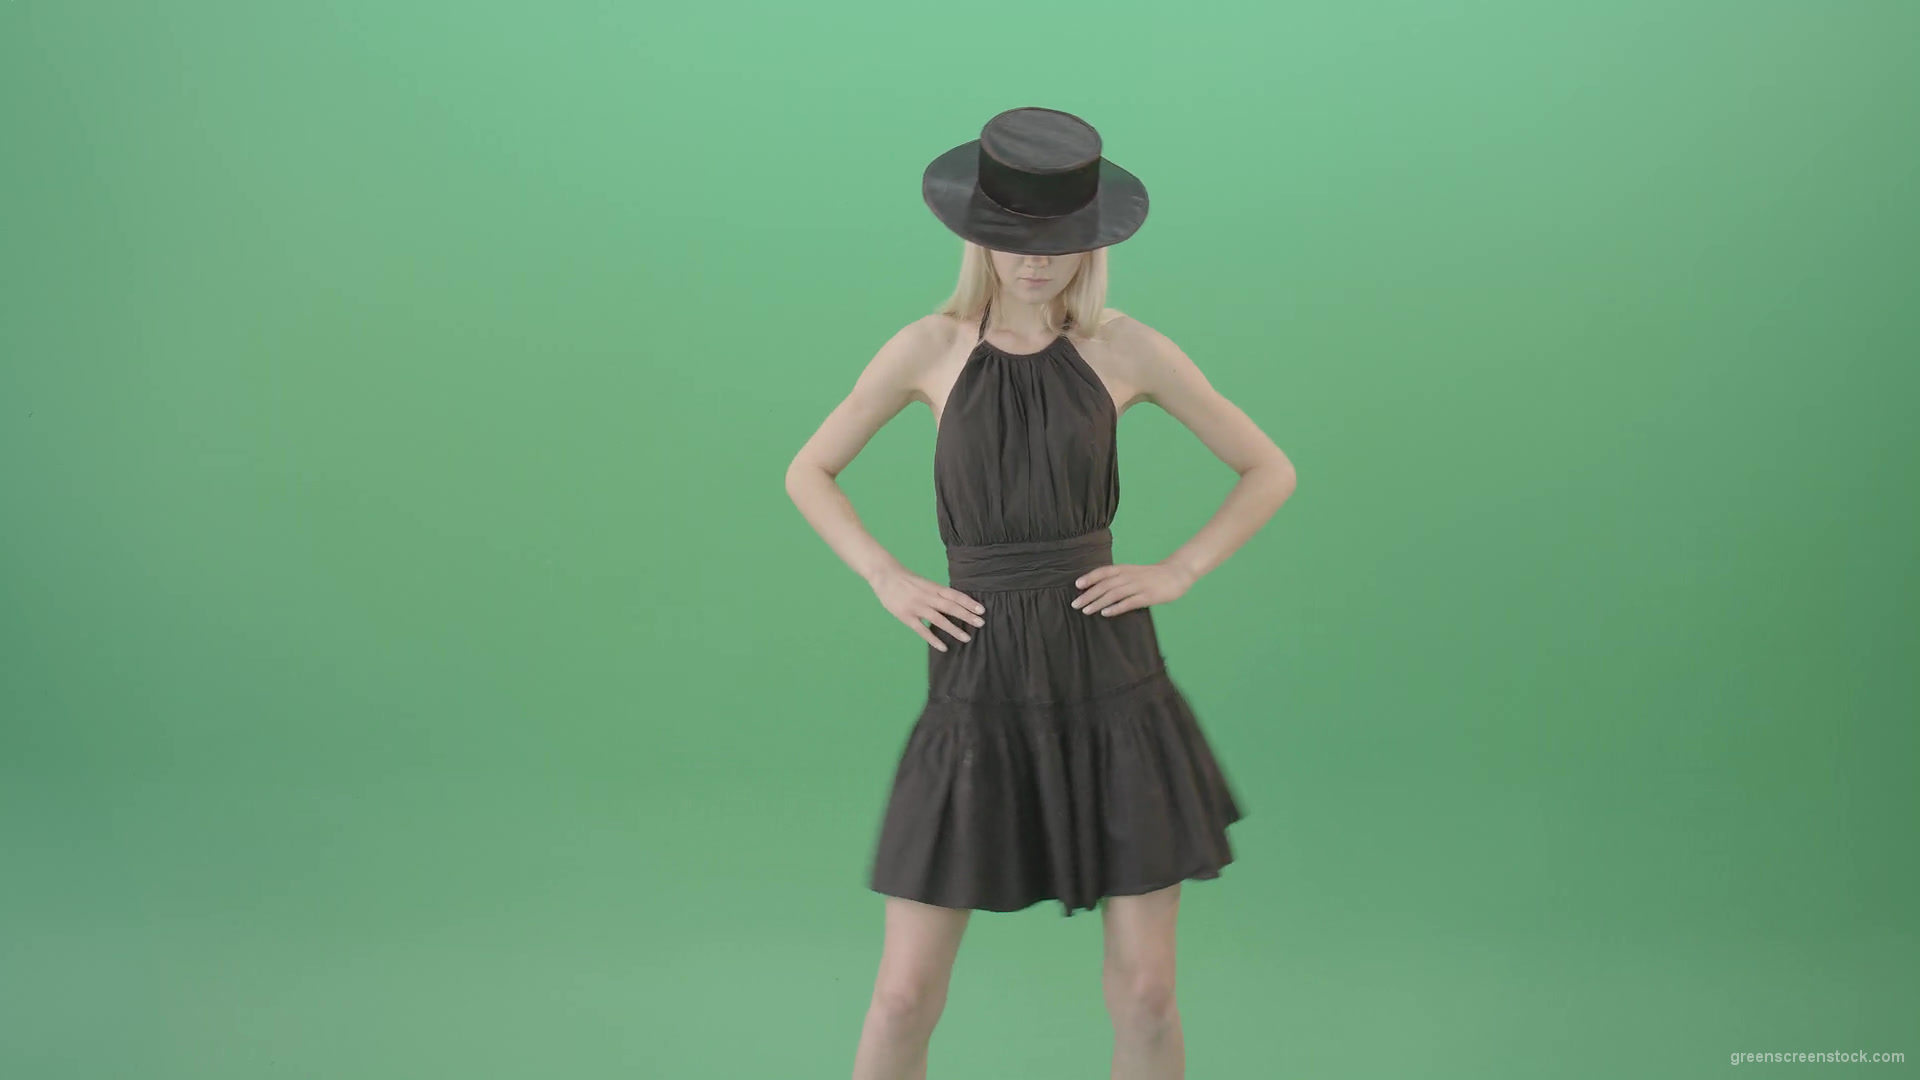 Elegant-girl-in-black-dress-and-hat-chilling-dance-isolated-on-green-screen-4K-Video-Footage-1920_004 Green Screen Stock